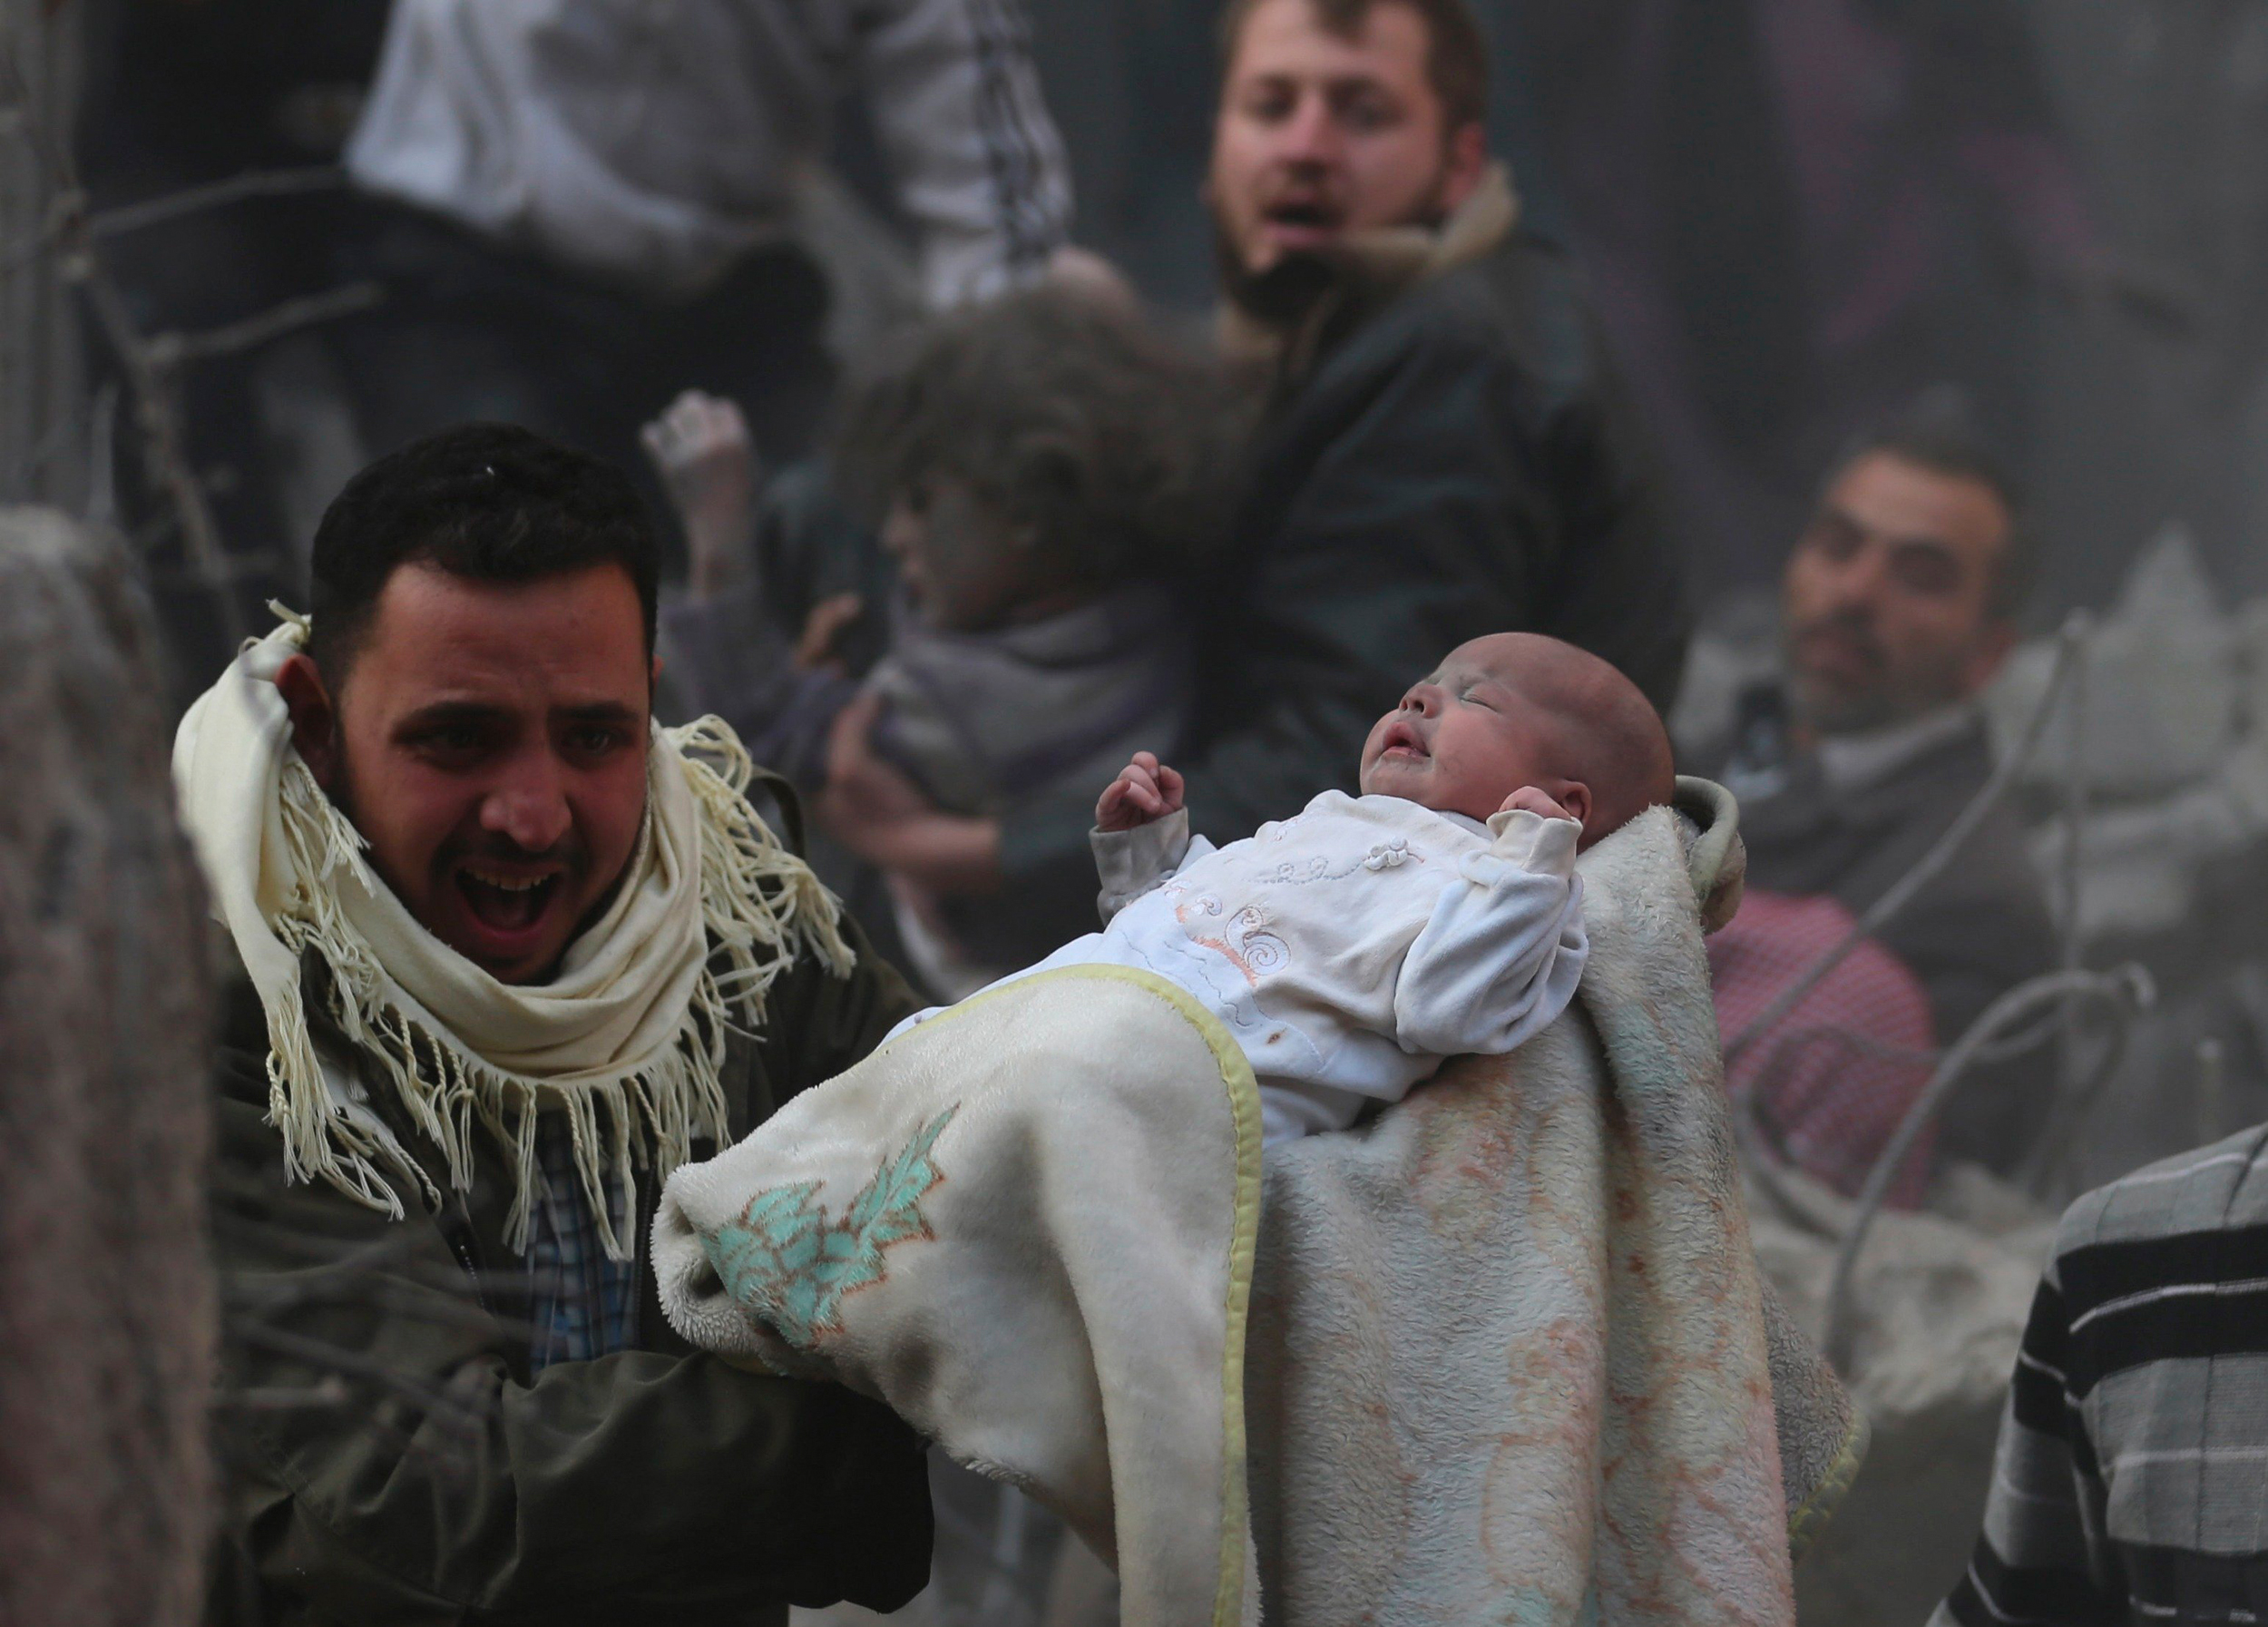 A man carries a baby who survived what activists say was an airstrike by forces loyal to Syrian President Bashar al-Assad in the Duma neighbourhood of Damascus January 7, 2014. REUTERS/Bassam Khabieh (SYRIA - Tags: POLITICS CIVIL UNREST CONFLICT TPX IMAGES OF THE DAY)